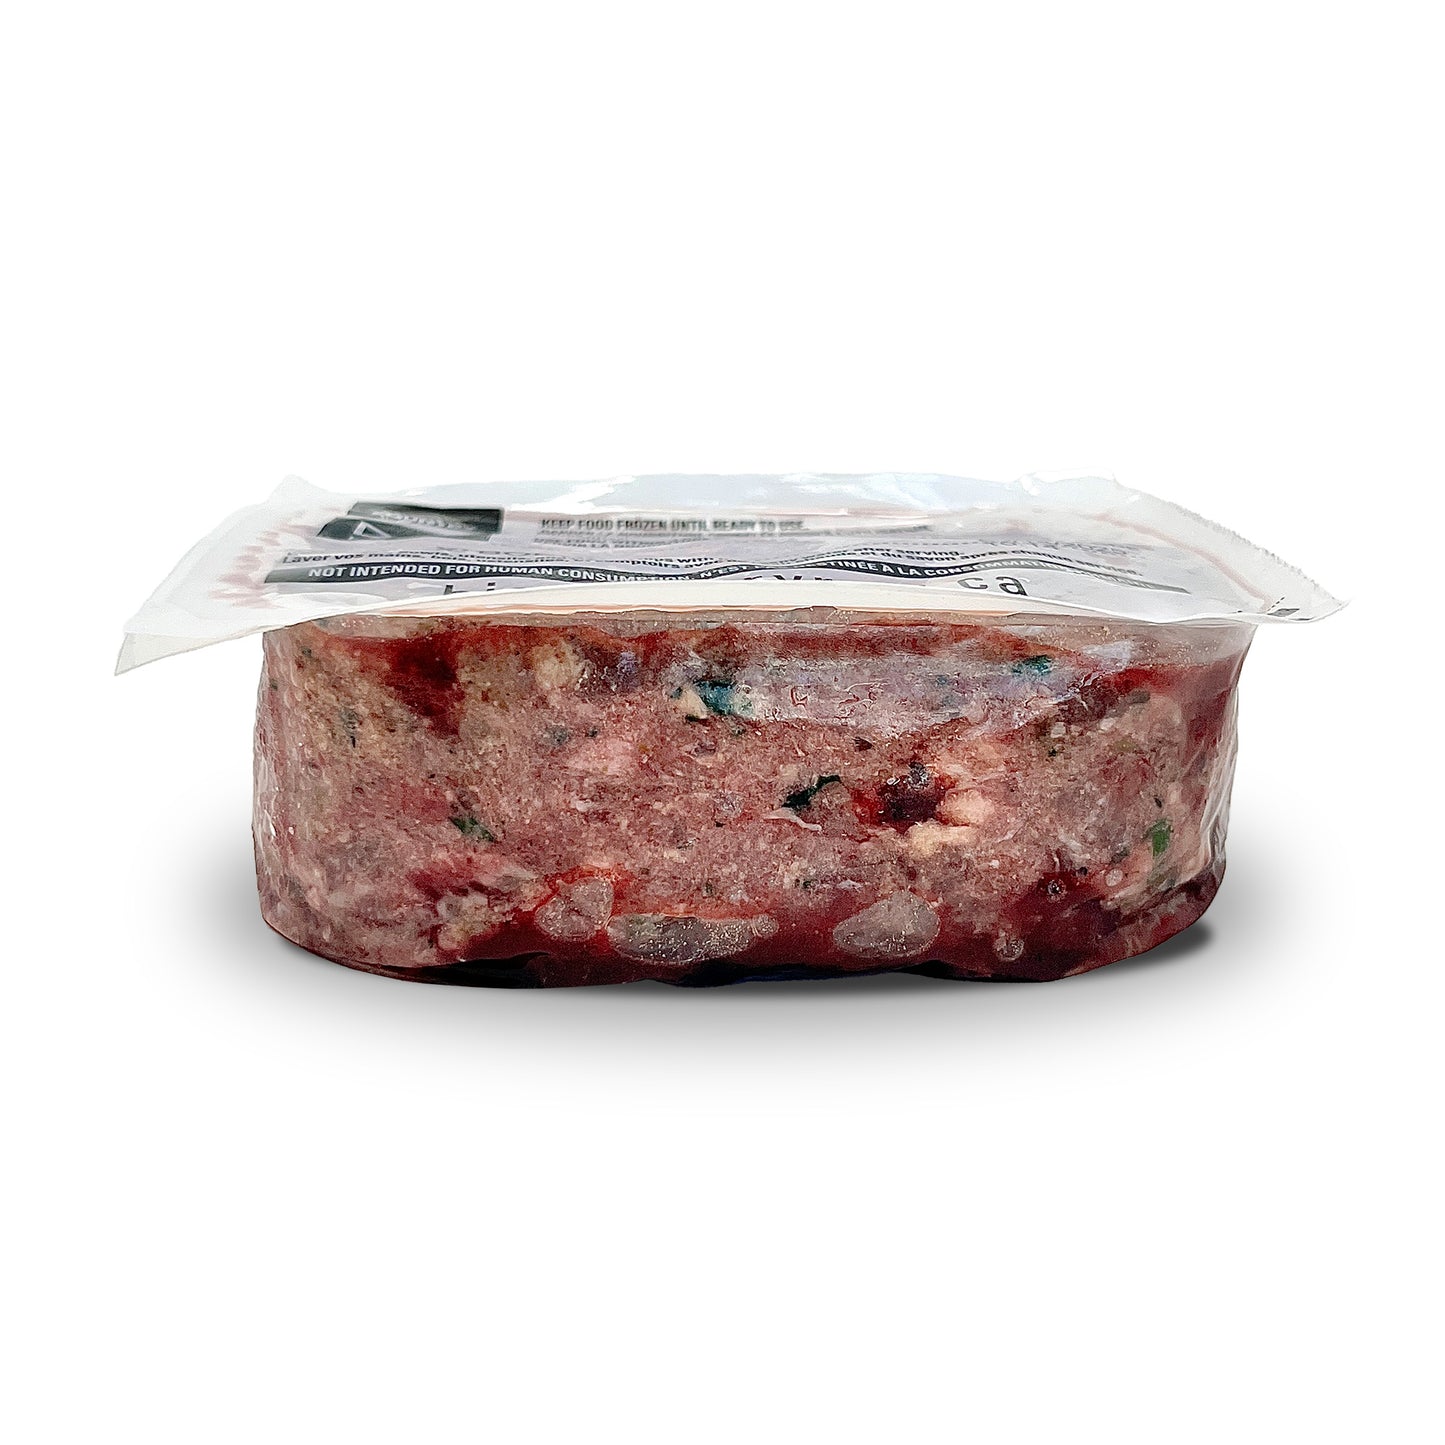 BIG COUNTRY RAW XL 30LBS - BEEF